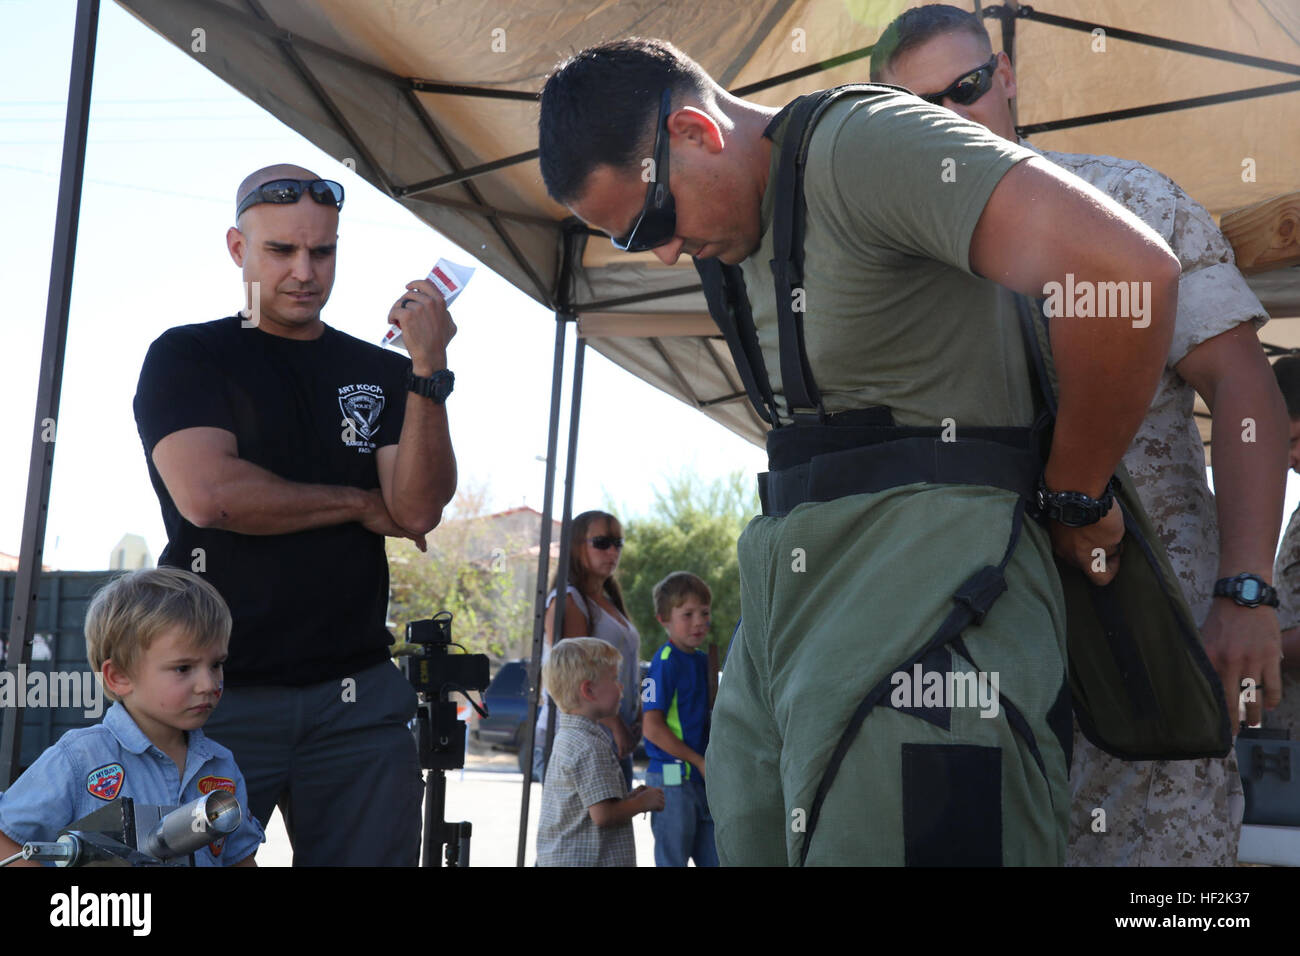 Sgt. Oscar Morales, explosive ordnance technician, Combat Center Explosive Ordnance Disposal team, demonstrates how to put on the EOD suit for Urijah Andress and his father, Capt. Adam Andress, during the Pioneer Days Fair at Luckie Park, Twentynine Palms, Calif., Oct. 19, 2014. The EOD team showed people at the fair some of the gear used when defusing explosives. (Official Marine Corps photo by Pfc. Julio McGraw/ Released) Combat Center Marines participate in Pioneer Days 141019-M-TM495-705 Stock Photo